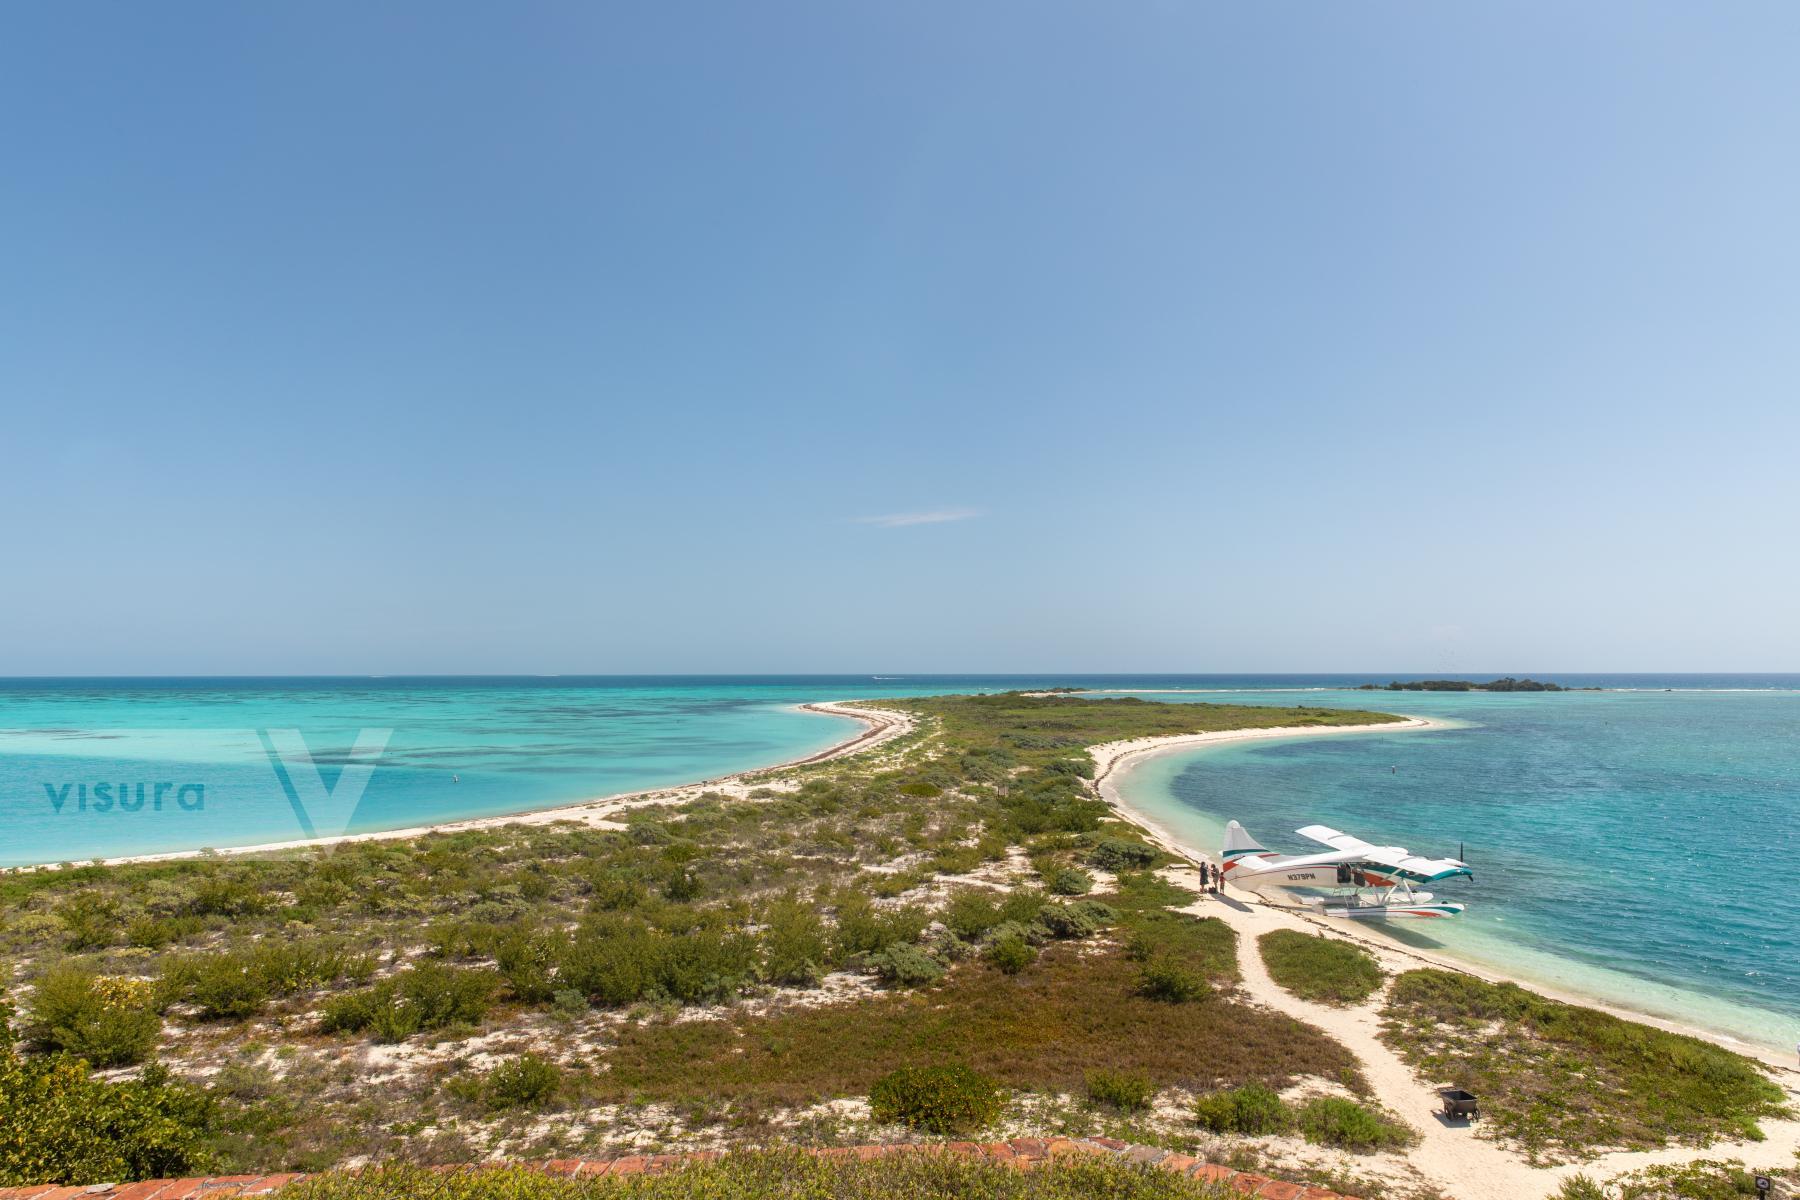 Purchase Seaplane Tours on Dry Tortugas National Park by Katie Linsky Shaw